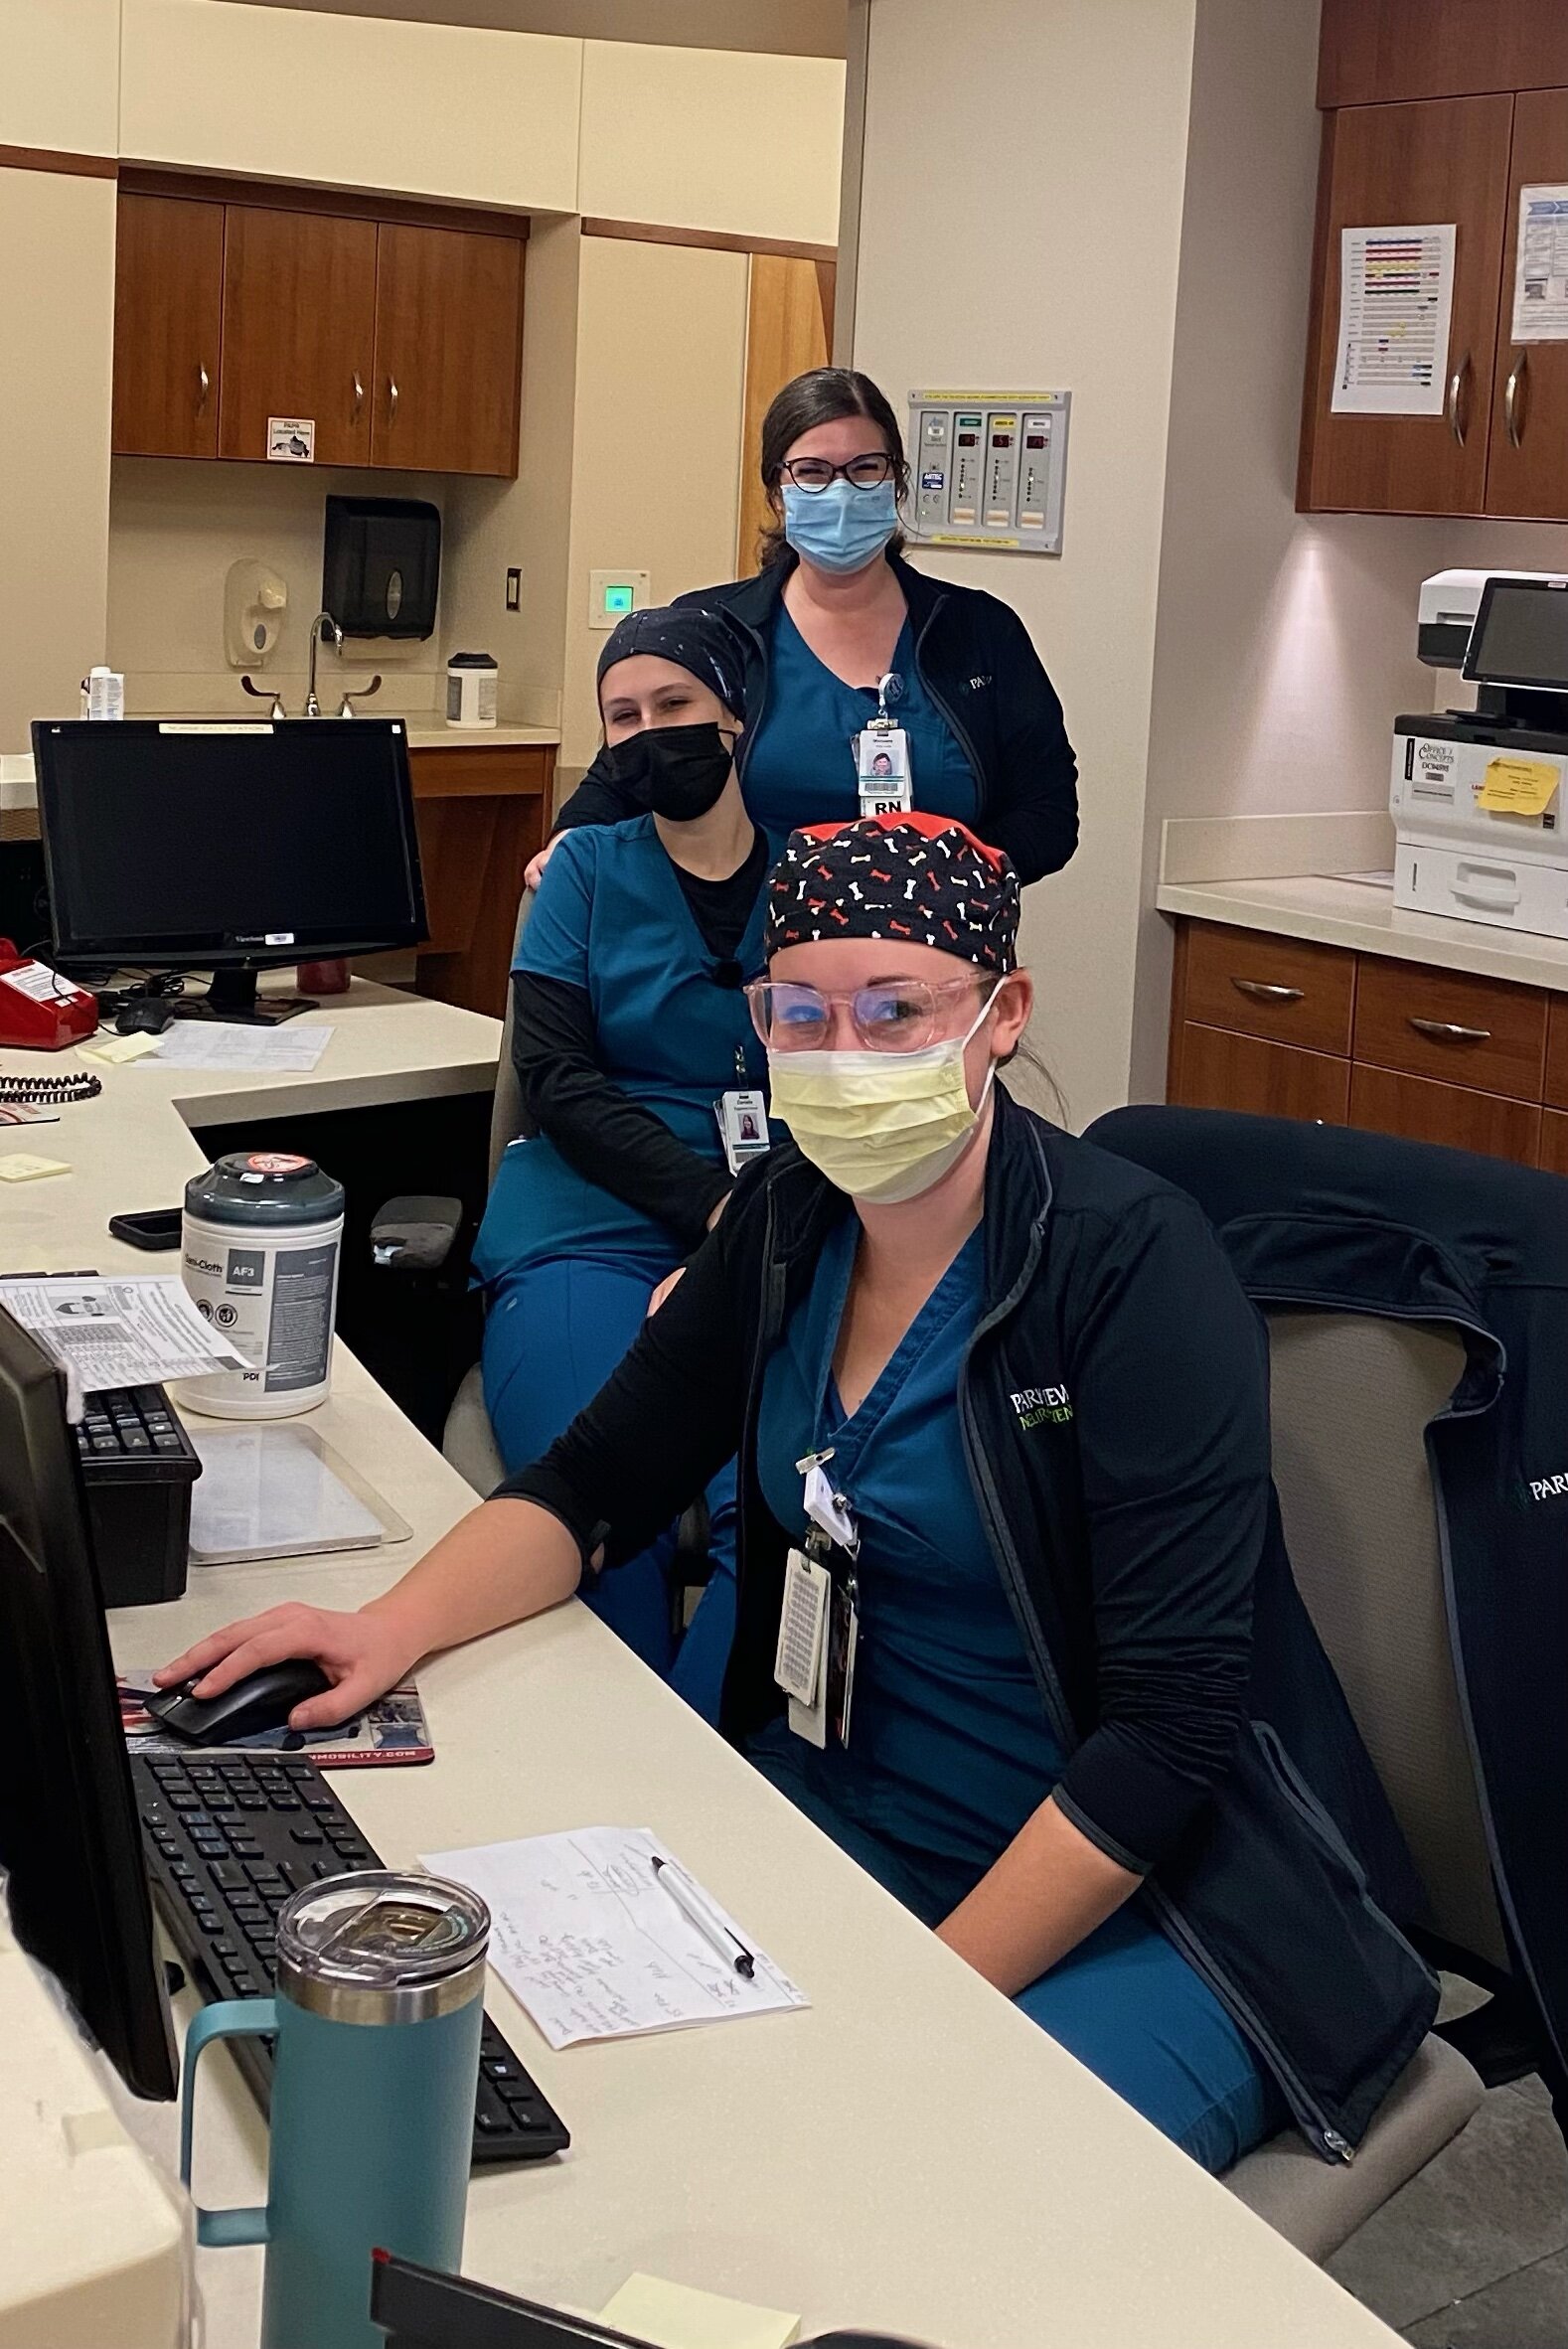 Michaela Weir, pictured in back, is shown during a recent Helping Hands shift with fellow RNs Danielle Gombas, middle, and Kelli Bultemeyer on the ortho trauma unit at Parkview Regional Medical Center.